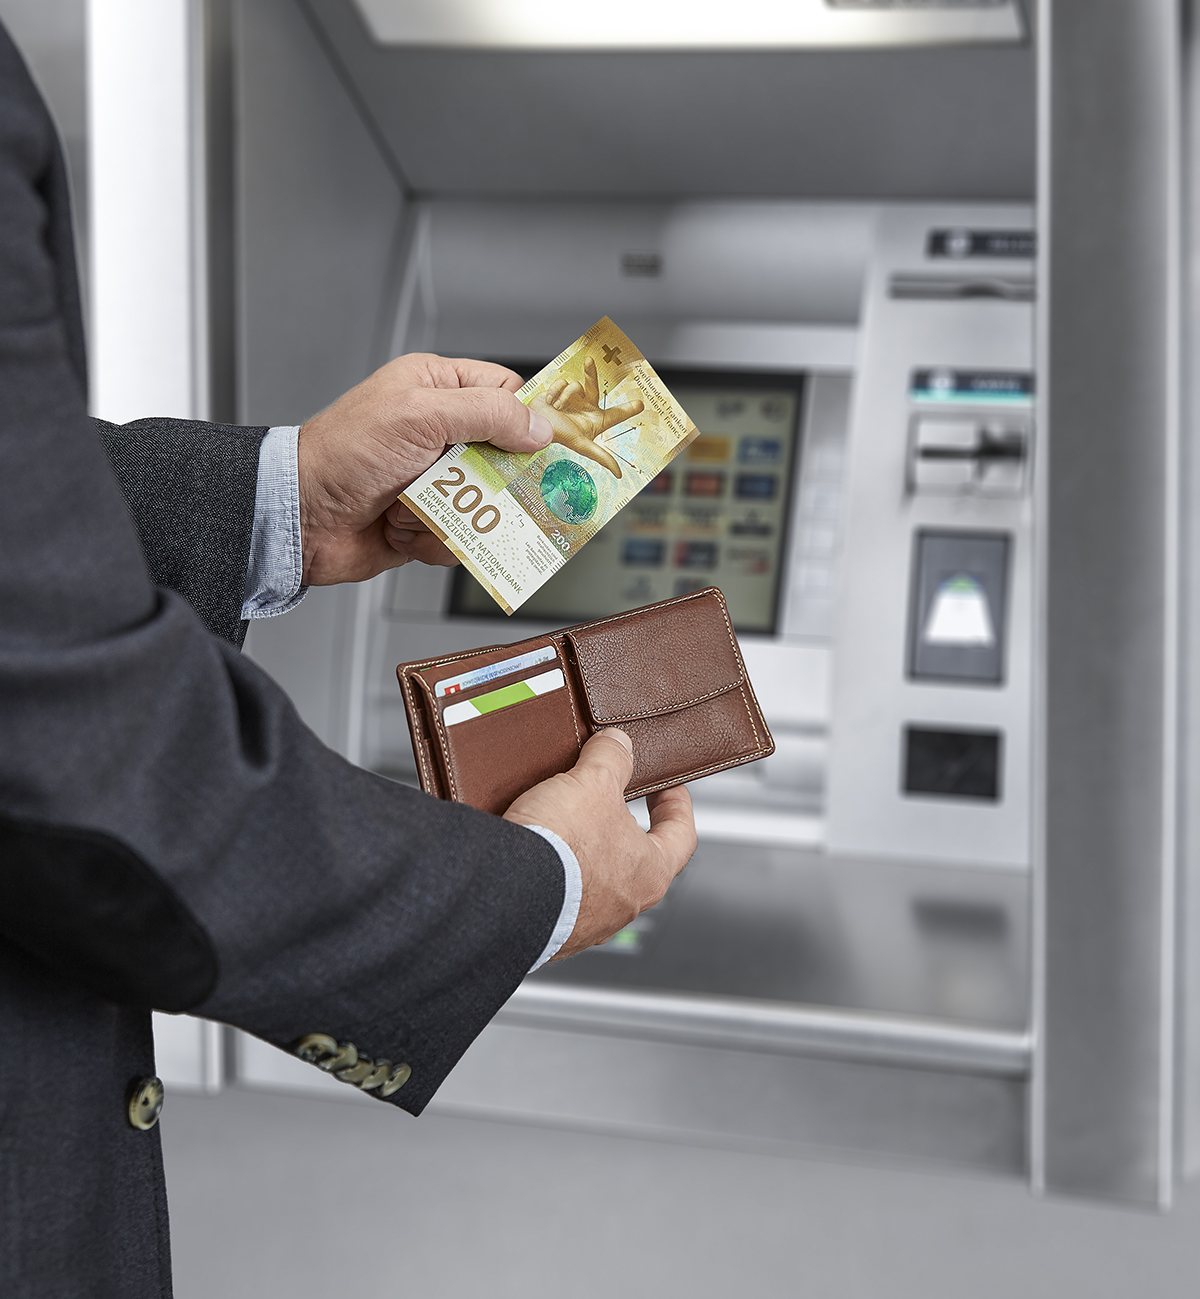 200-franc notes being withdrawn from an ATM